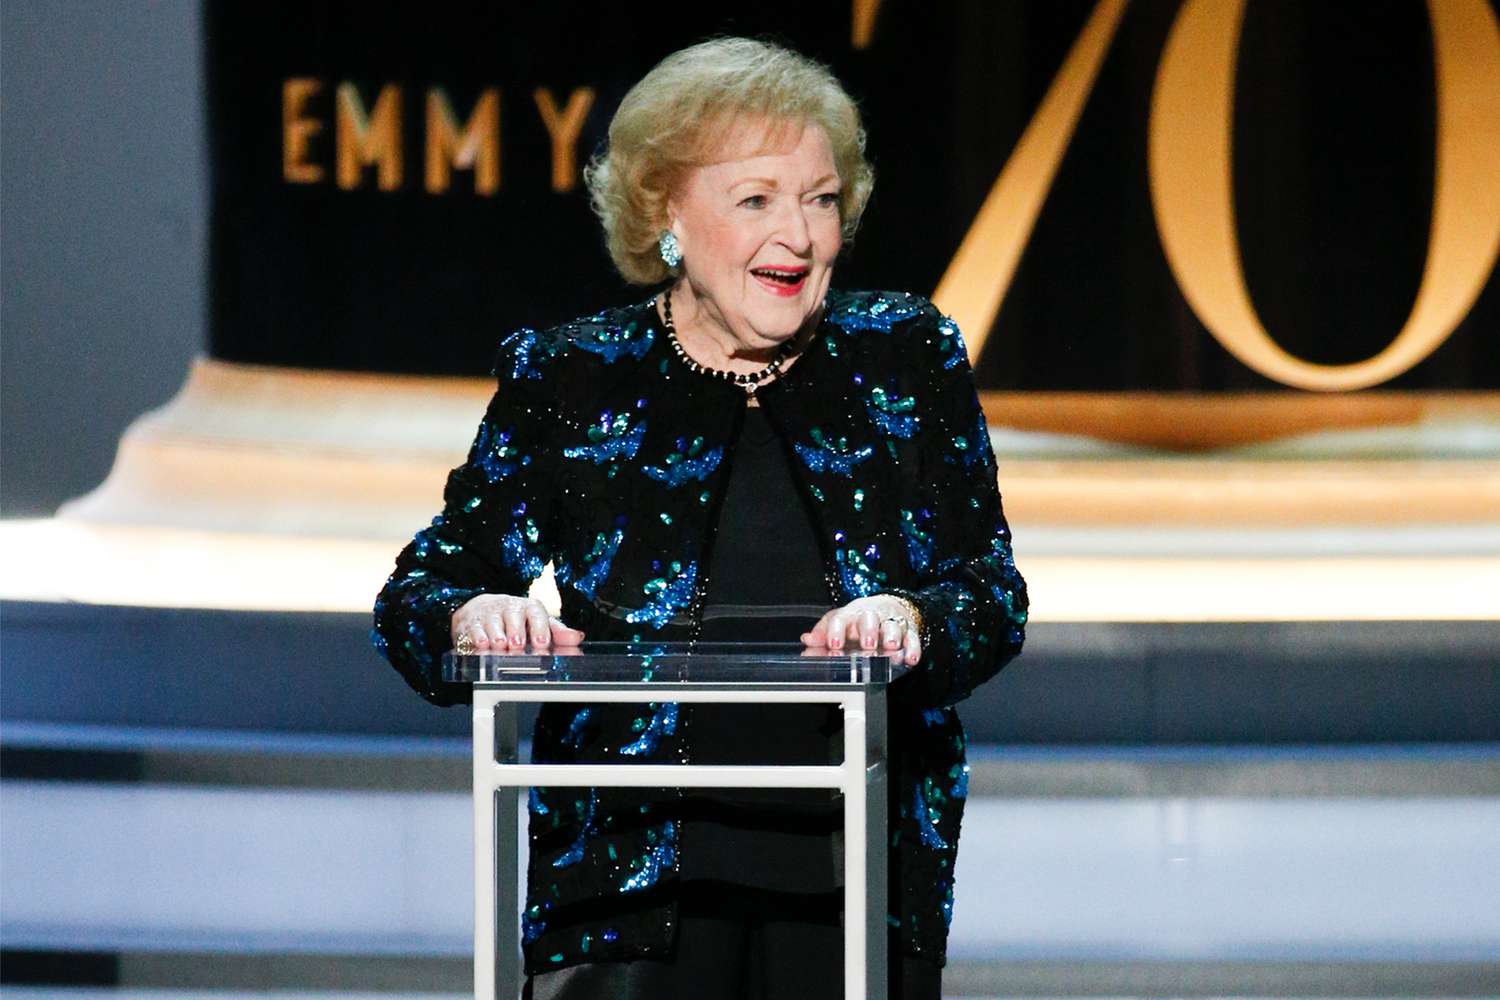 Betty White during the 70th annual Primetime Emmy Awards in 2018